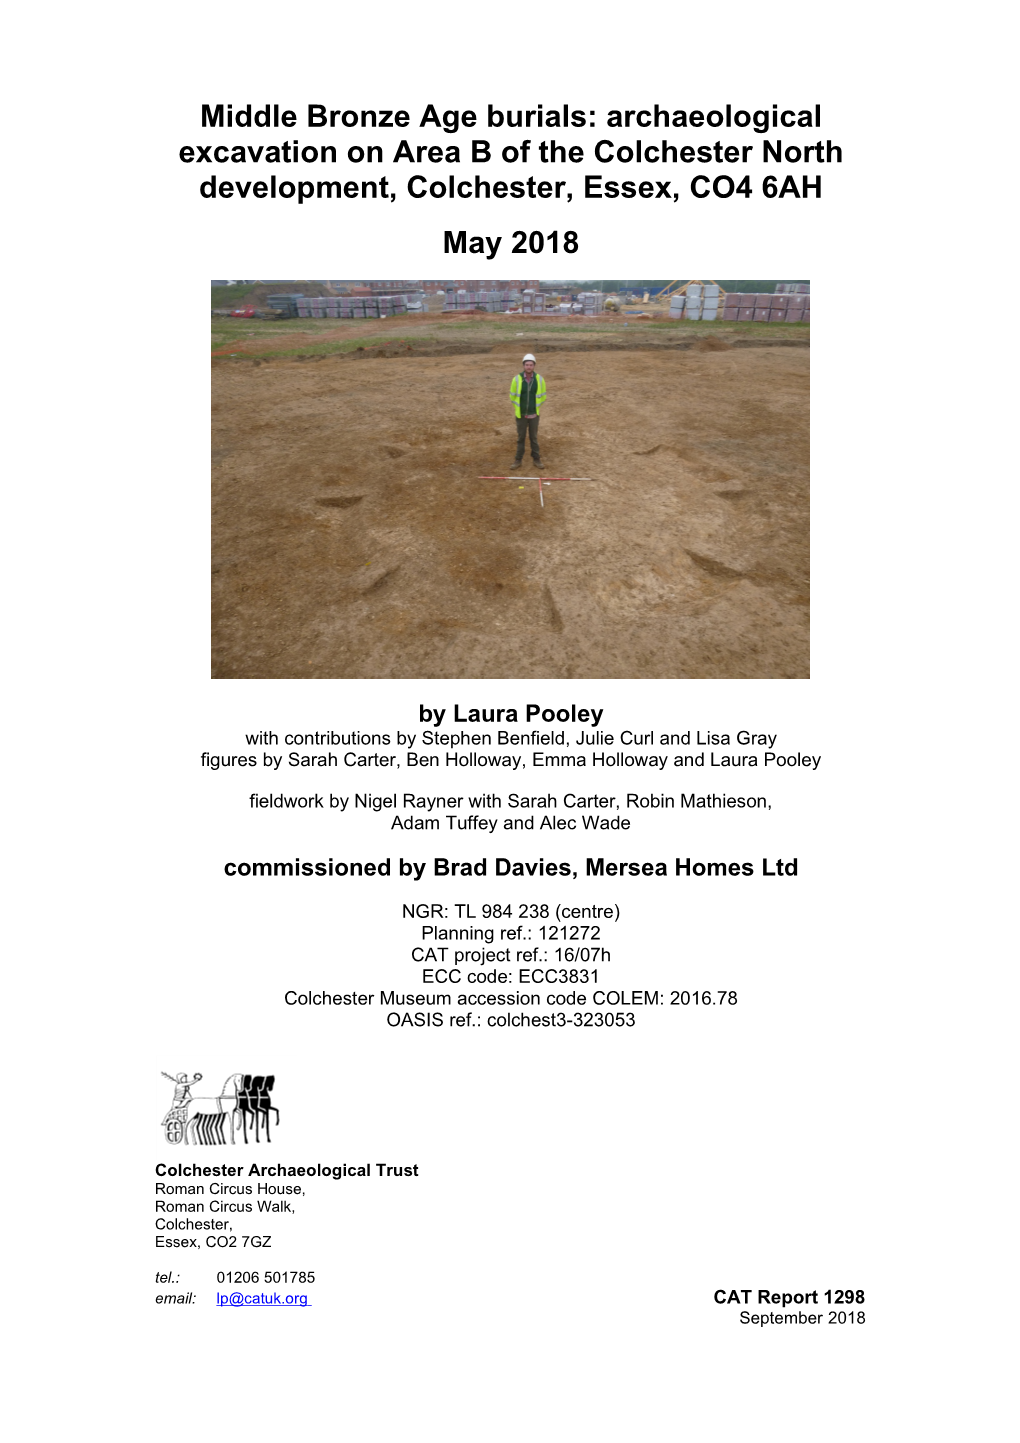 Middle Bronze Age Burials: Archaeological Excavation on Area B of the Colchester North Development, Colchester, Essex, CO4 6AH May 2018